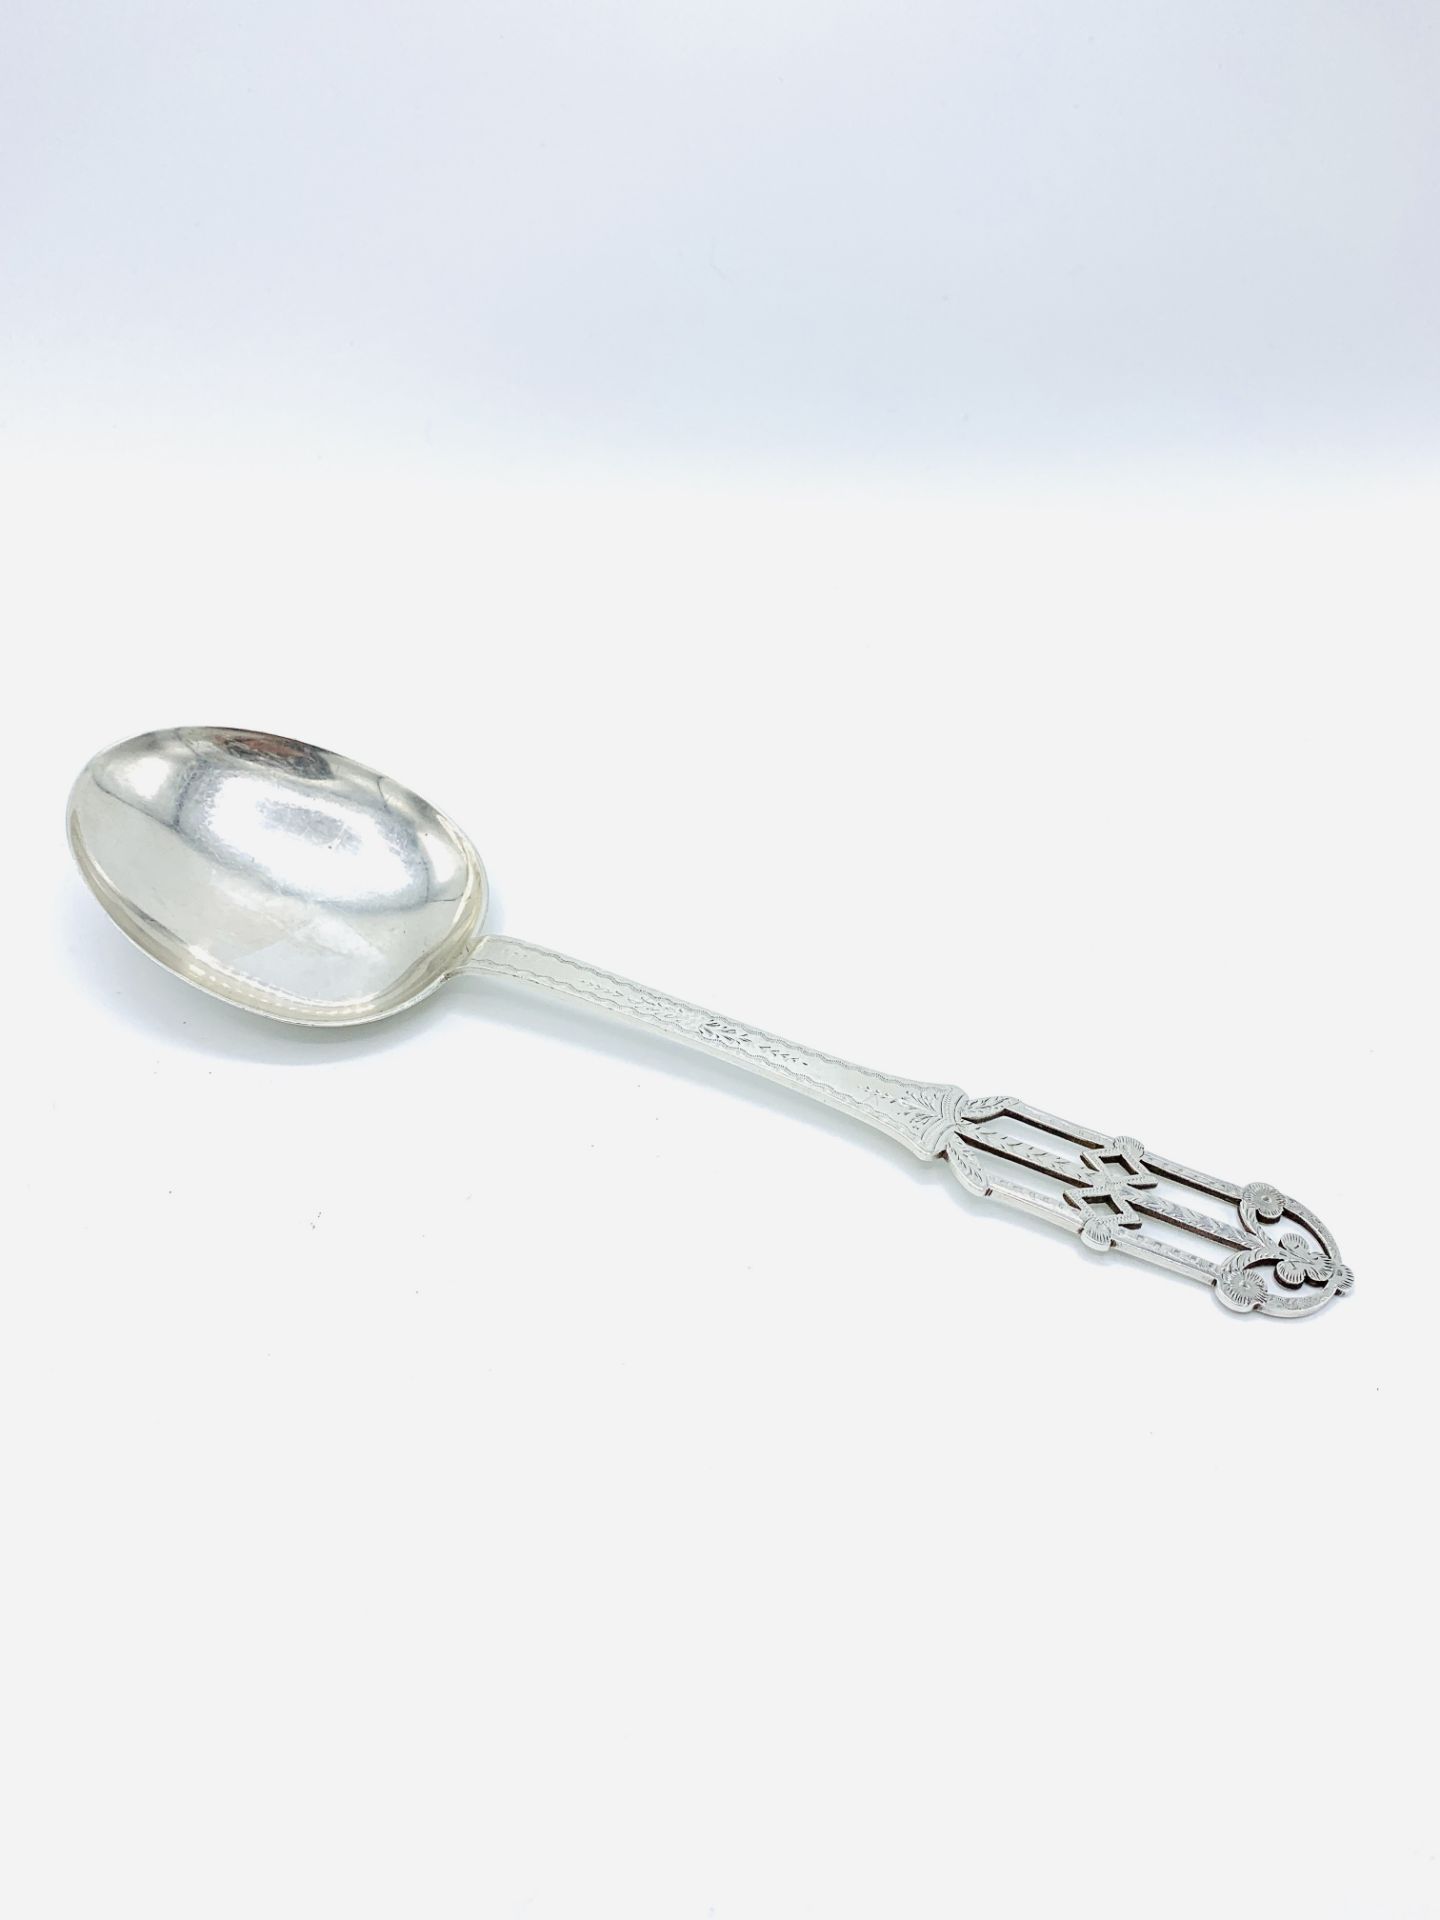 Hand pierced and engraved arts and crafts serving spoon. - Image 4 of 4